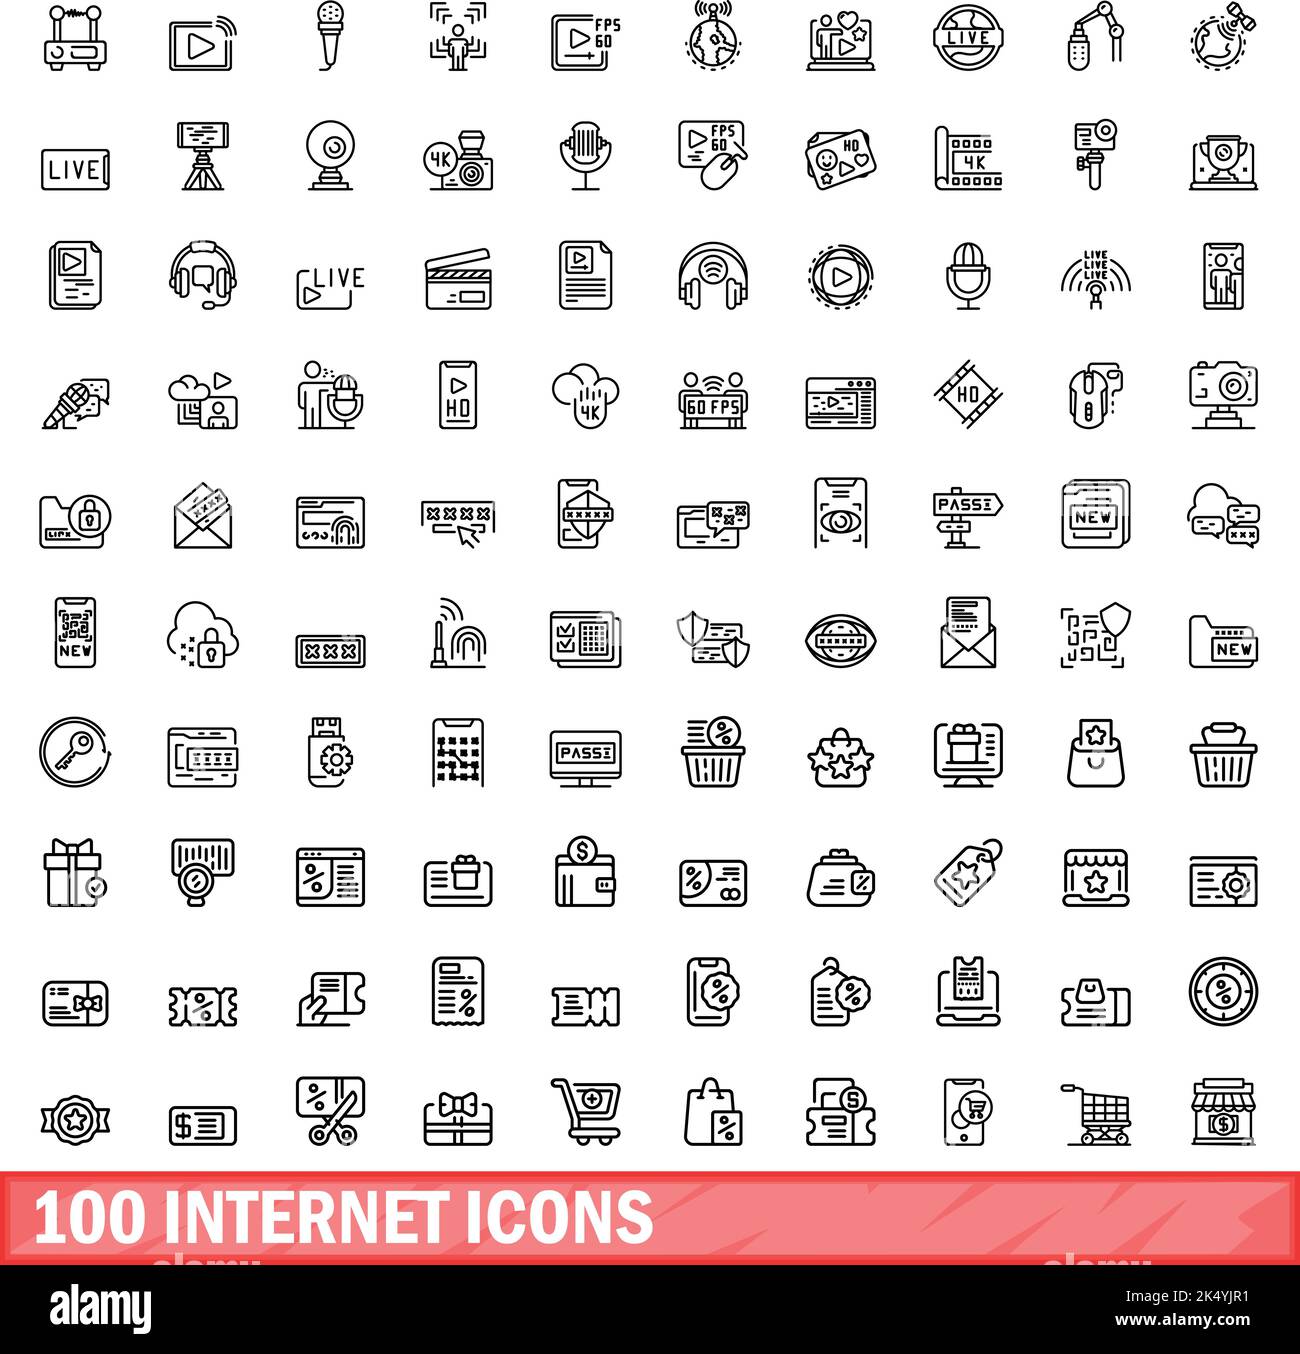 100 internet icons set. Outline illustration of 100 internet icons vector set isolated on white background Stock Vector